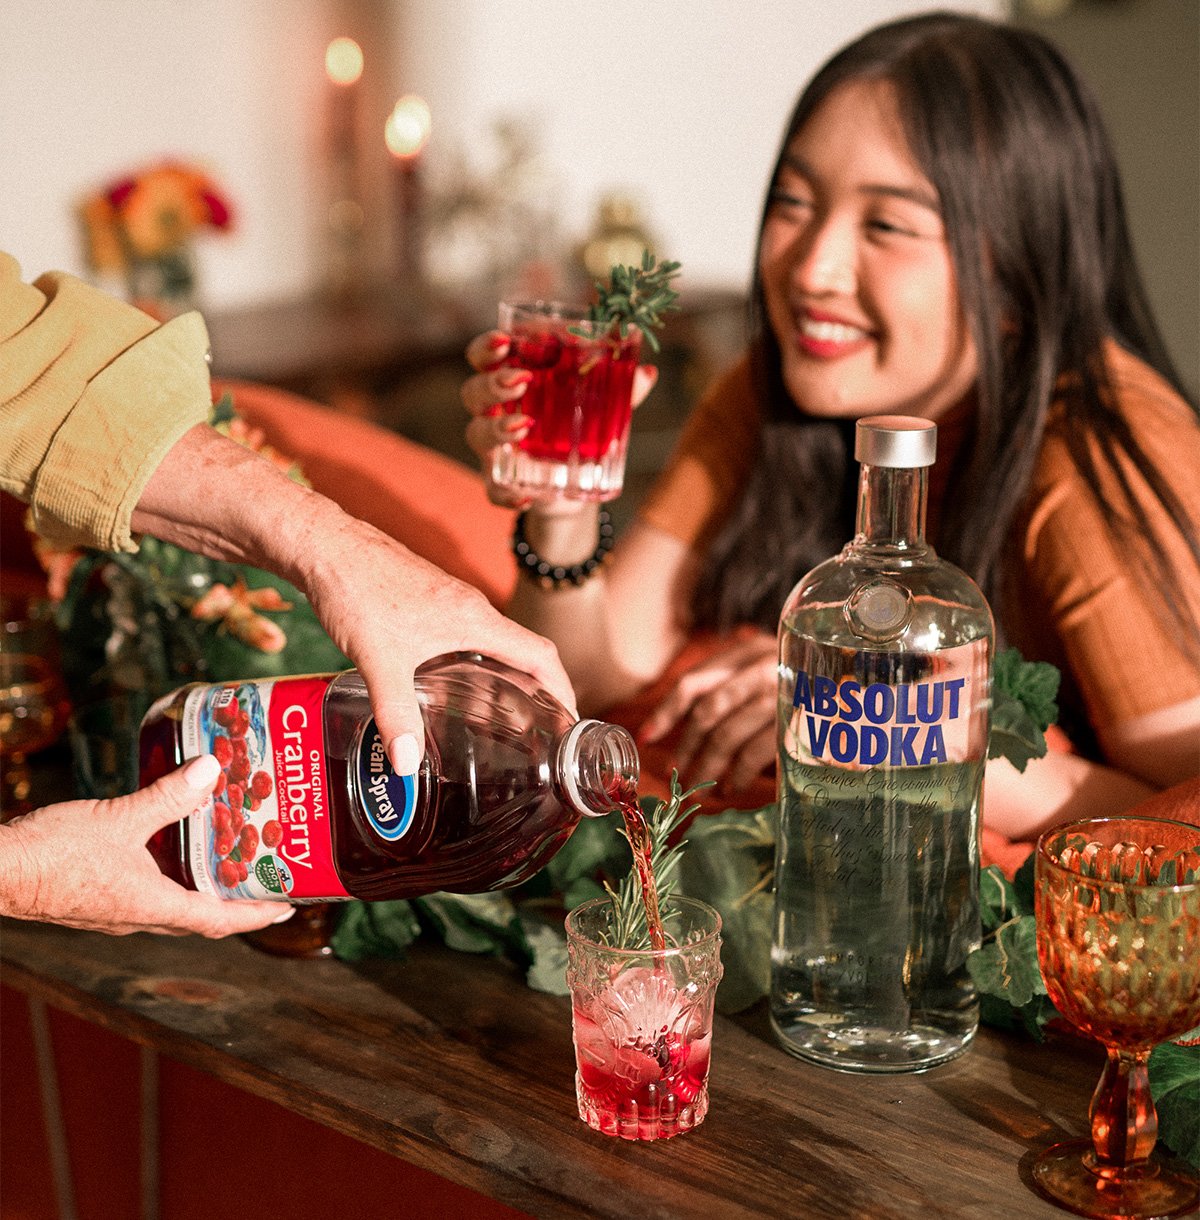 Kick your New Year's celebrations from meh to merry  with The Holiday Nightcap. Our tart tang partnered wth Absolut Vodka is 'chef's kiss'.